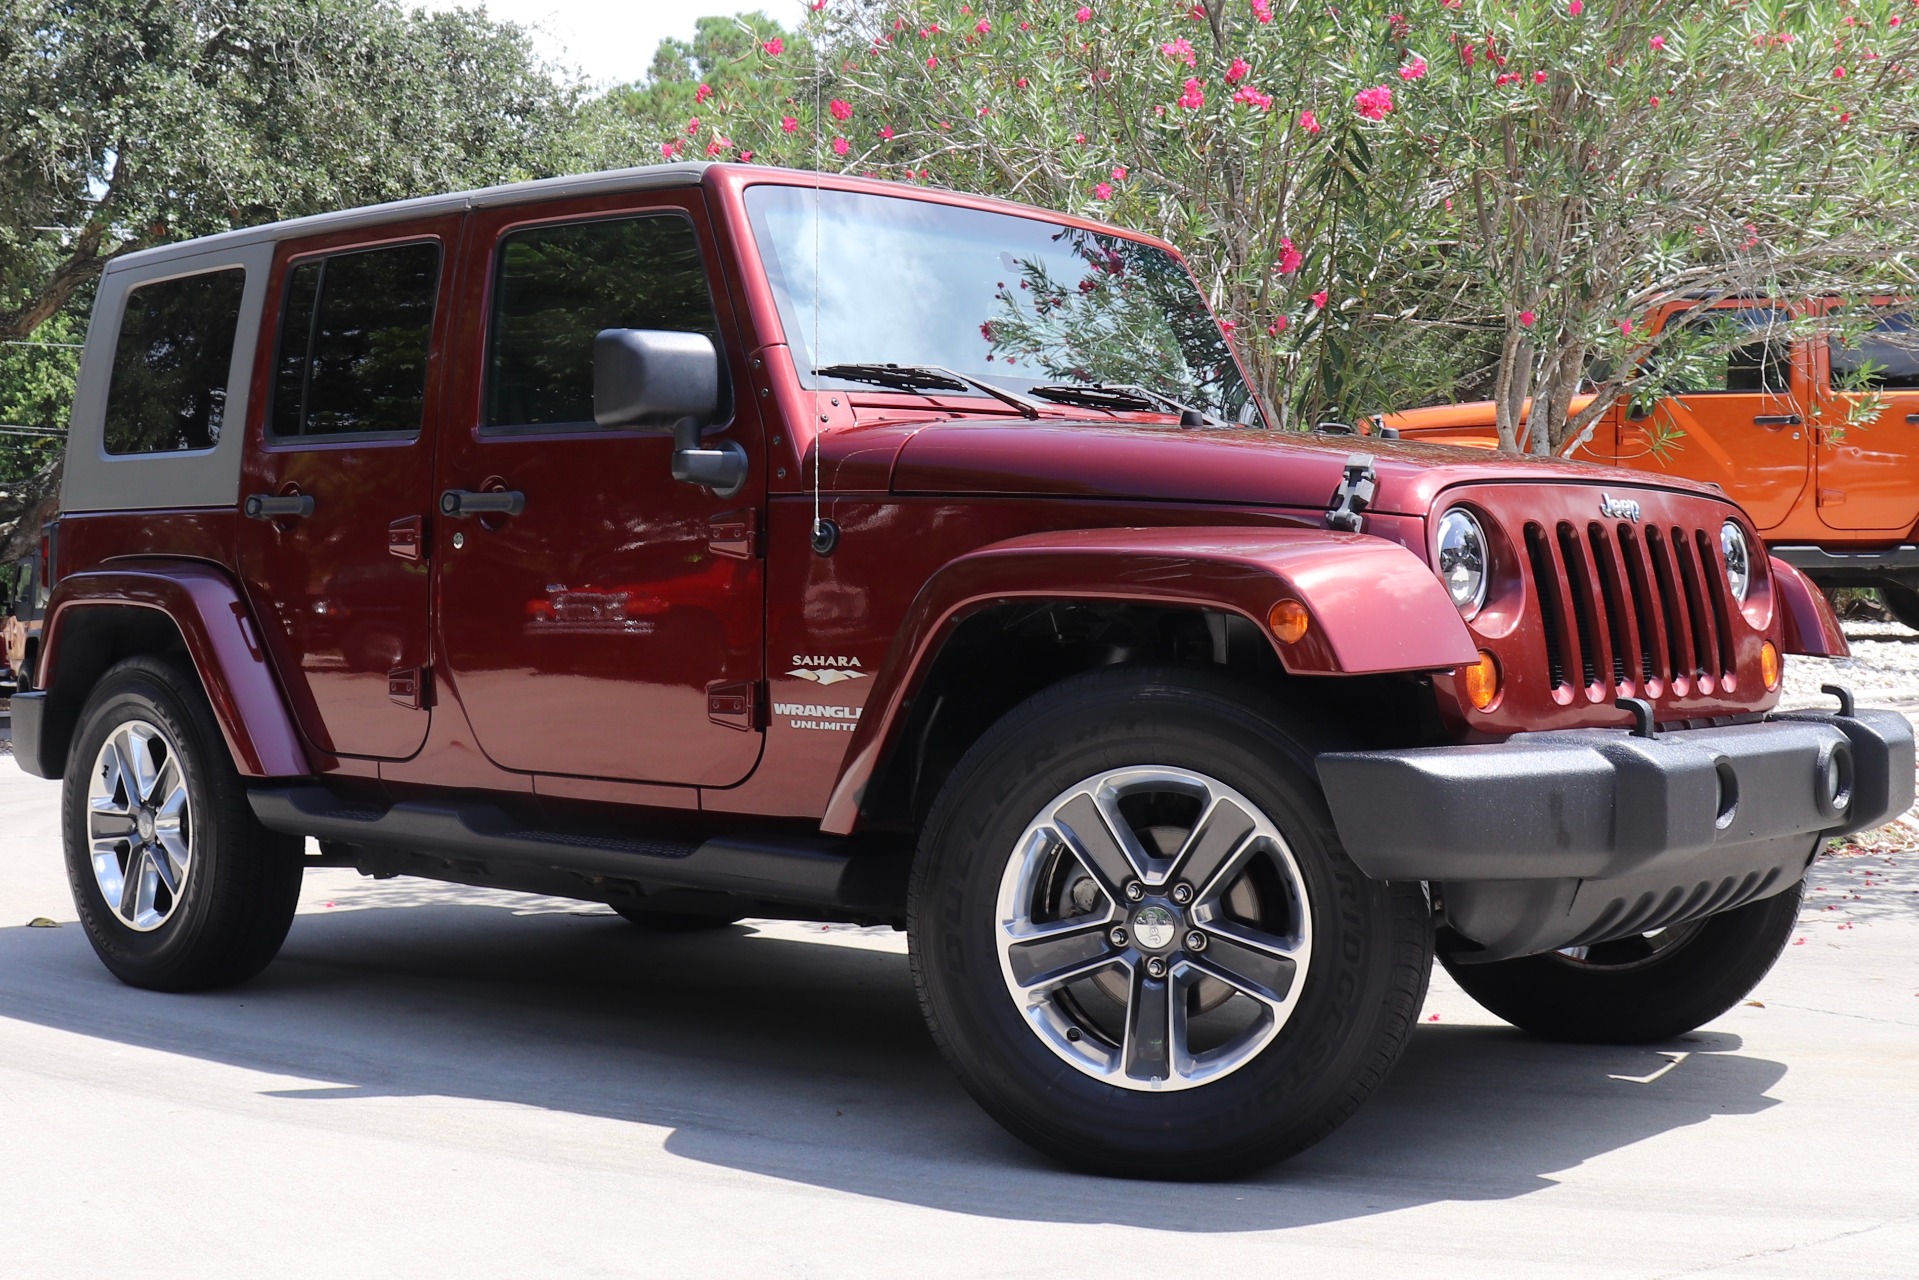 Used 2007 Jeep Wrangler Unlimited Sahara For Sale 18 995 Select 